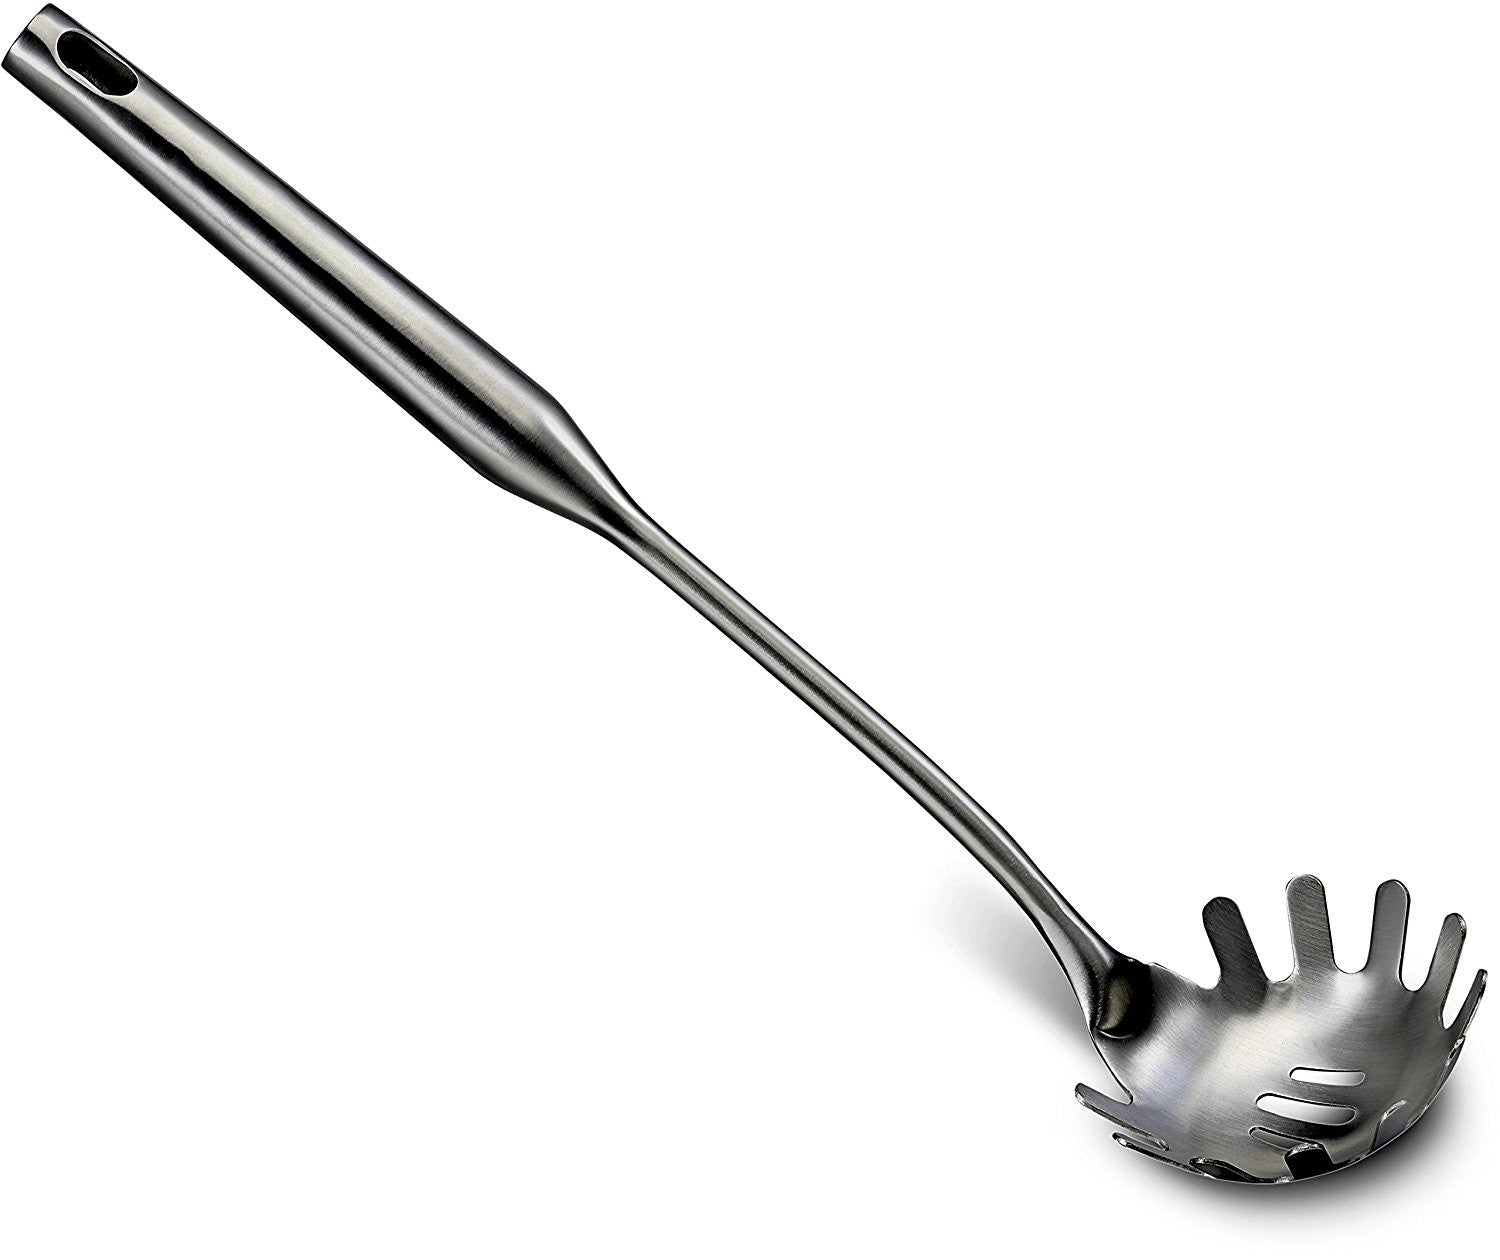 stainless steel pasta spoon server Stainless Steel Pasta Spoon Metal Pasta